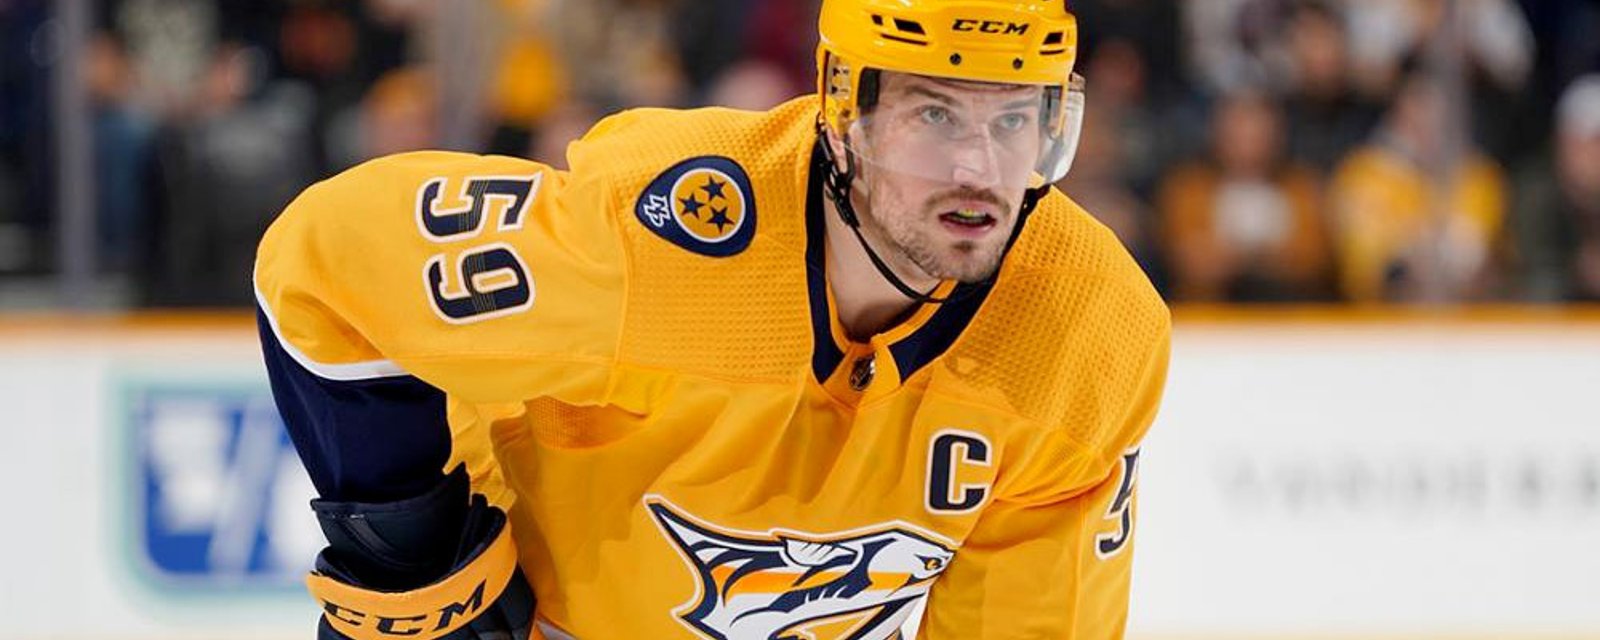 Josi signs crazy contract extension to stay with the Preds